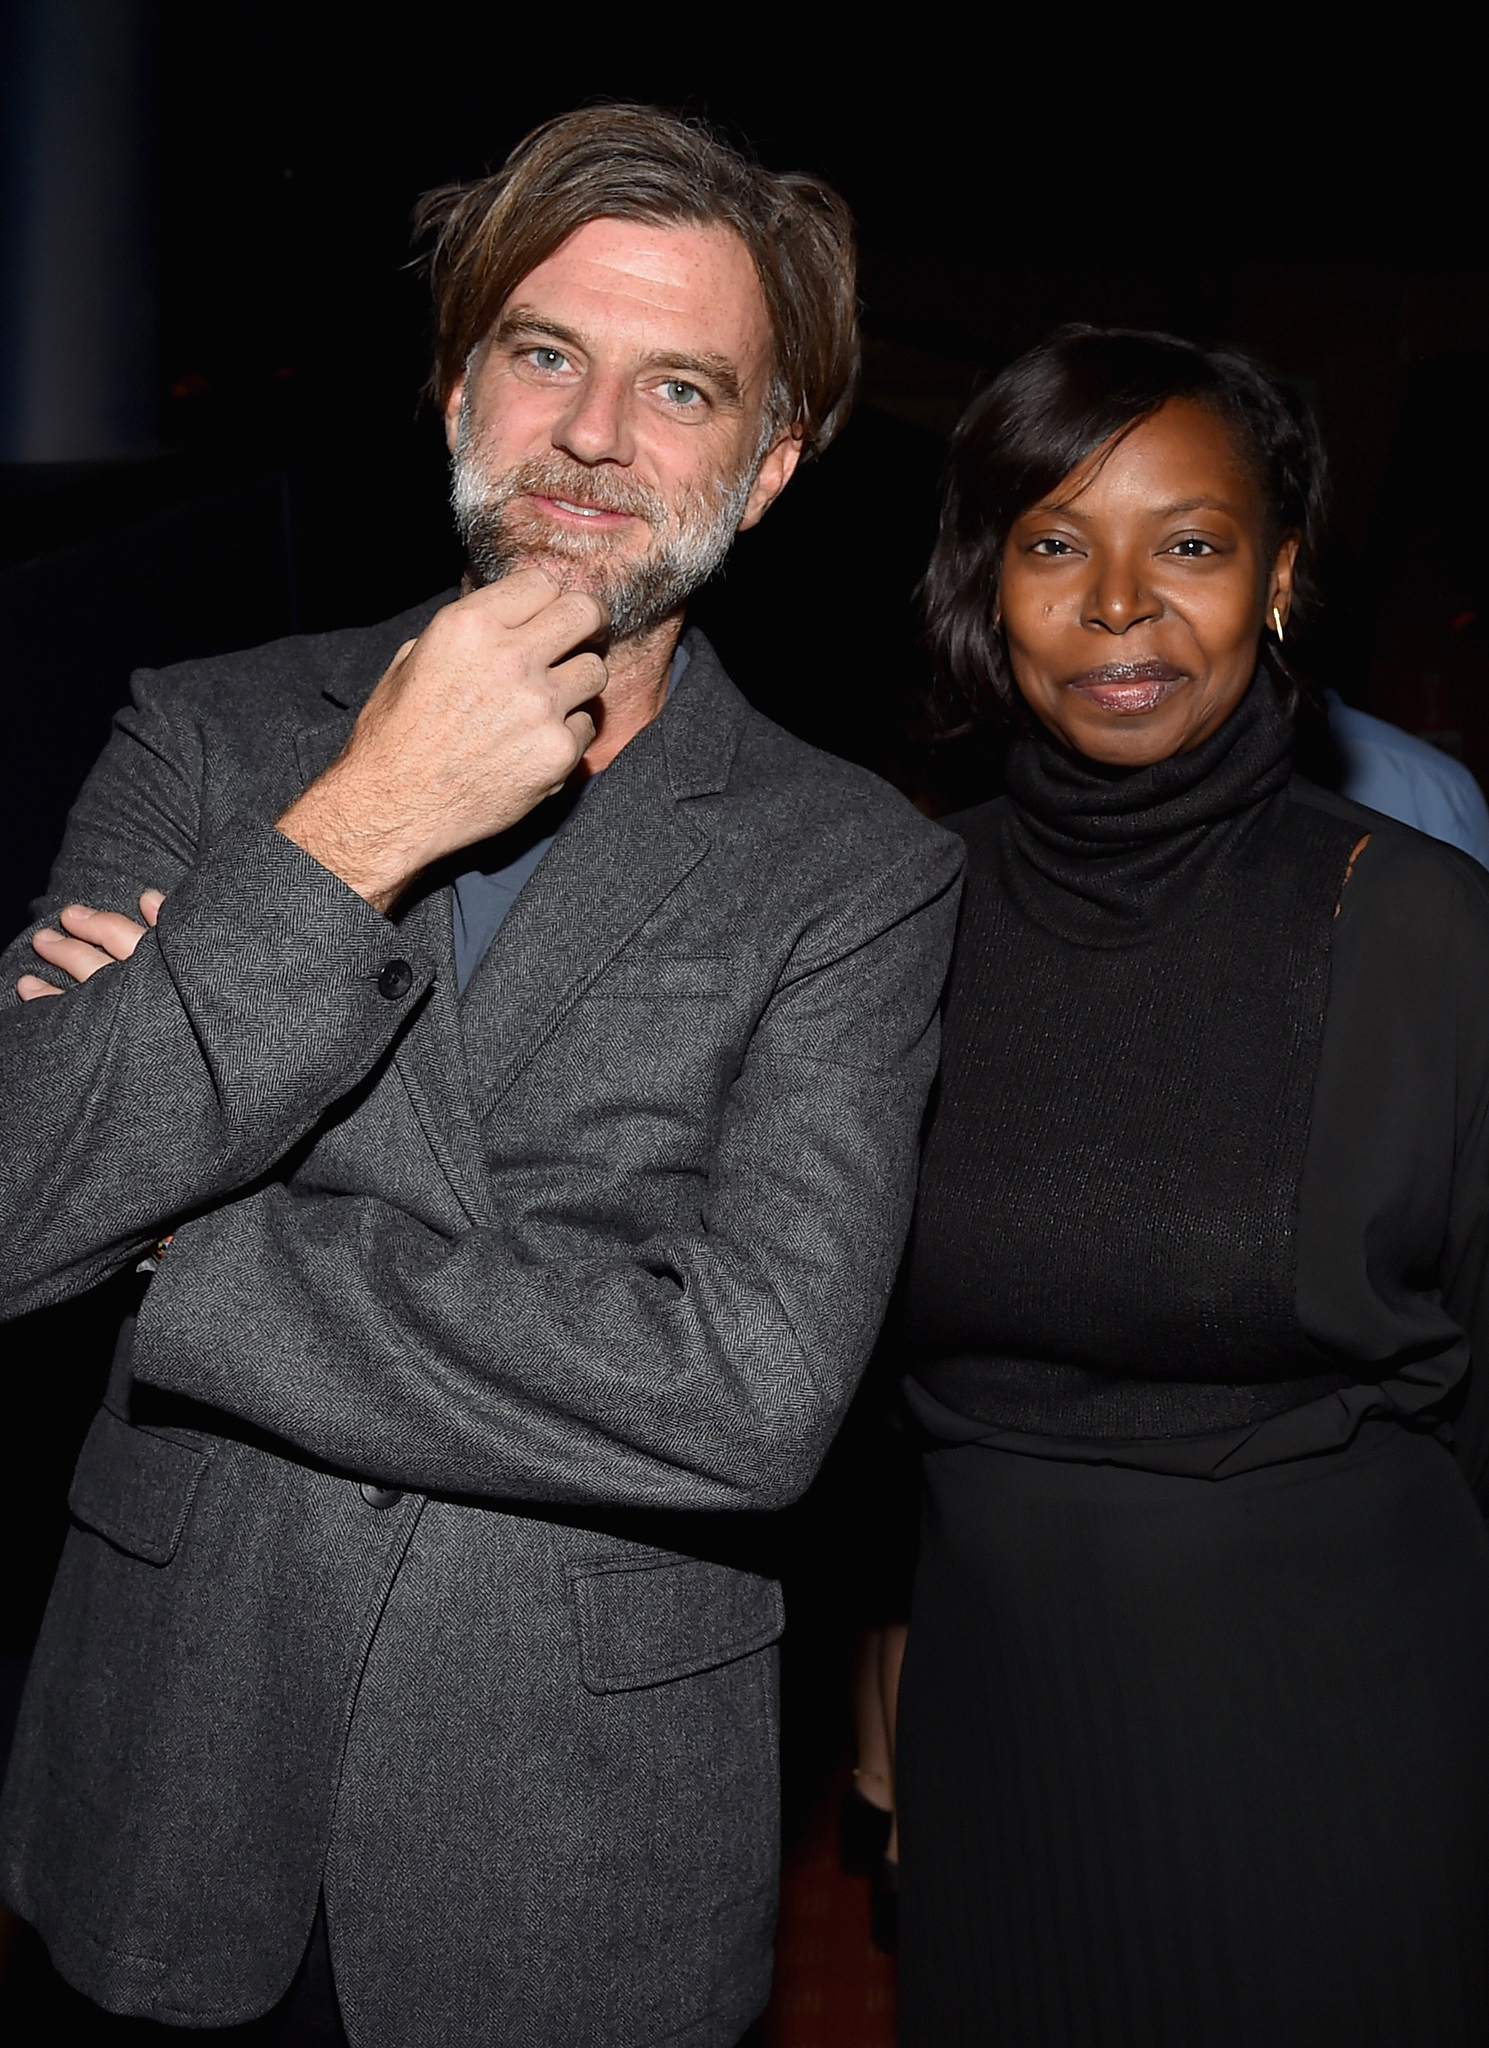 Paul Thomas Anderson and Jacqueline Lyanga at event of Zmogiska silpnybe (2014)